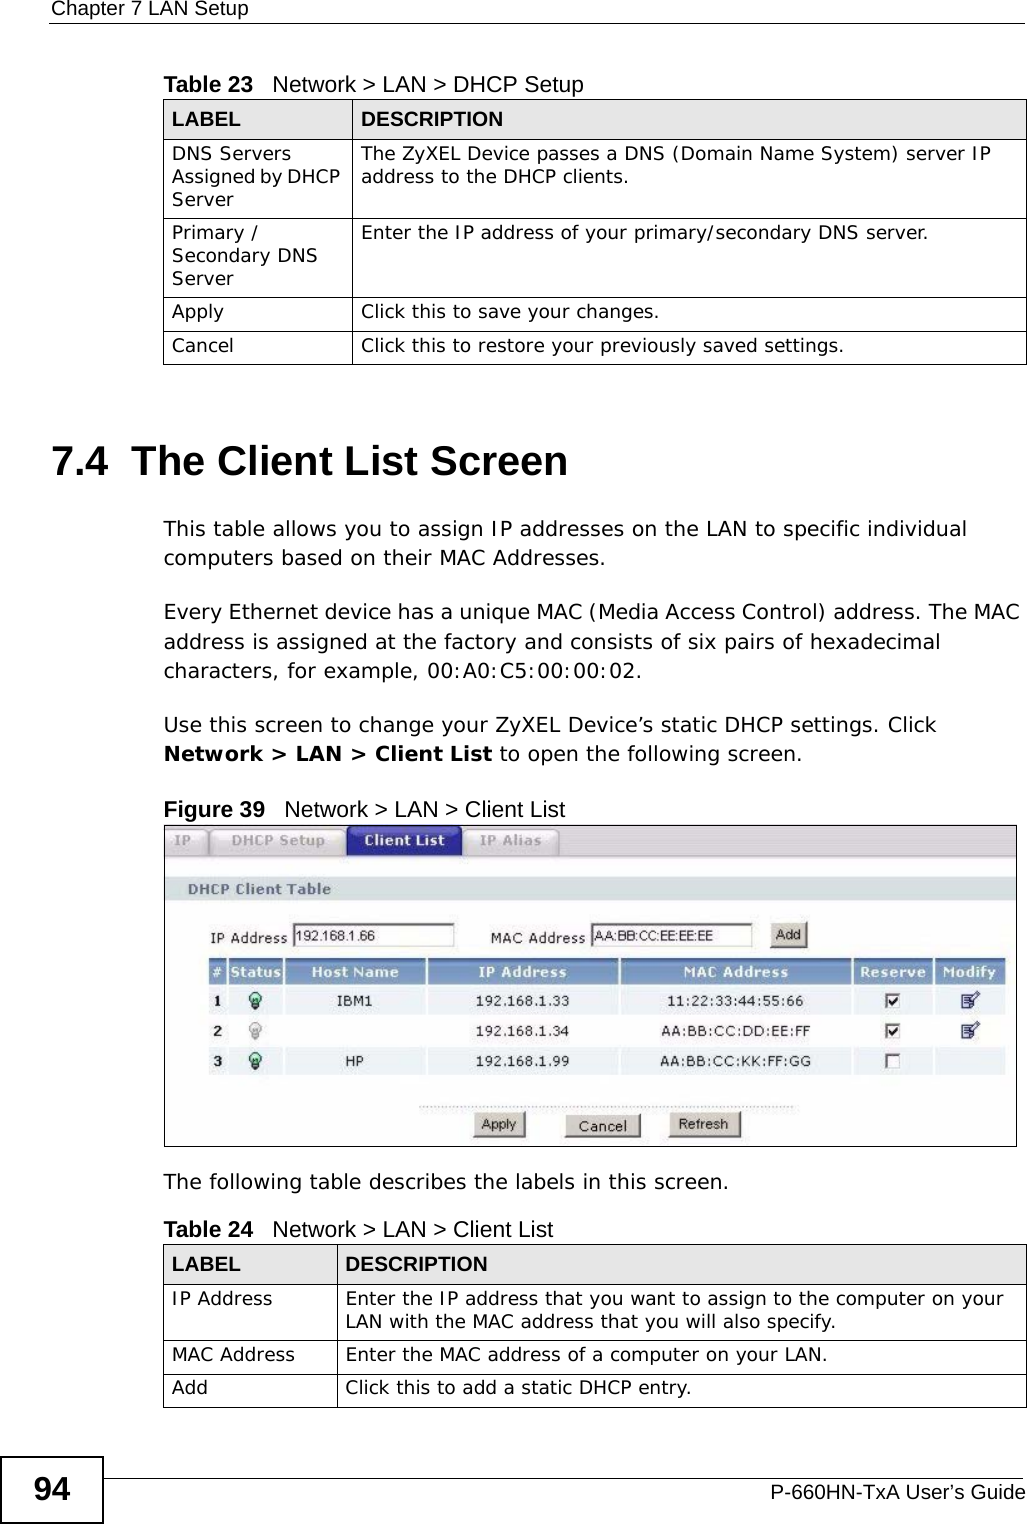 Chapter 7 LAN SetupP-660HN-TxA User’s Guide947.4  The Client List ScreenThis table allows you to assign IP addresses on the LAN to specific individual computers based on their MAC Addresses. Every Ethernet device has a unique MAC (Media Access Control) address. The MAC address is assigned at the factory and consists of six pairs of hexadecimal characters, for example, 00:A0:C5:00:00:02.Use this screen to change your ZyXEL Device’s static DHCP settings. Click Network &gt; LAN &gt; Client List to open the following screen.Figure 39   Network &gt; LAN &gt; Client List The following table describes the labels in this screen.DNS Servers Assigned by DHCP ServerThe ZyXEL Device passes a DNS (Domain Name System) server IP address to the DHCP clients. Primary /Secondary DNS ServerEnter the IP address of your primary/secondary DNS server.Apply Click this to save your changes.Cancel Click this to restore your previously saved settings.Table 23   Network &gt; LAN &gt; DHCP Setup LABEL DESCRIPTIONTable 24   Network &gt; LAN &gt; Client ListLABEL DESCRIPTIONIP Address Enter the IP address that you want to assign to the computer on your LAN with the MAC address that you will also specify.MAC Address Enter the MAC address of a computer on your LAN.Add Click this to add a static DHCP entry. 